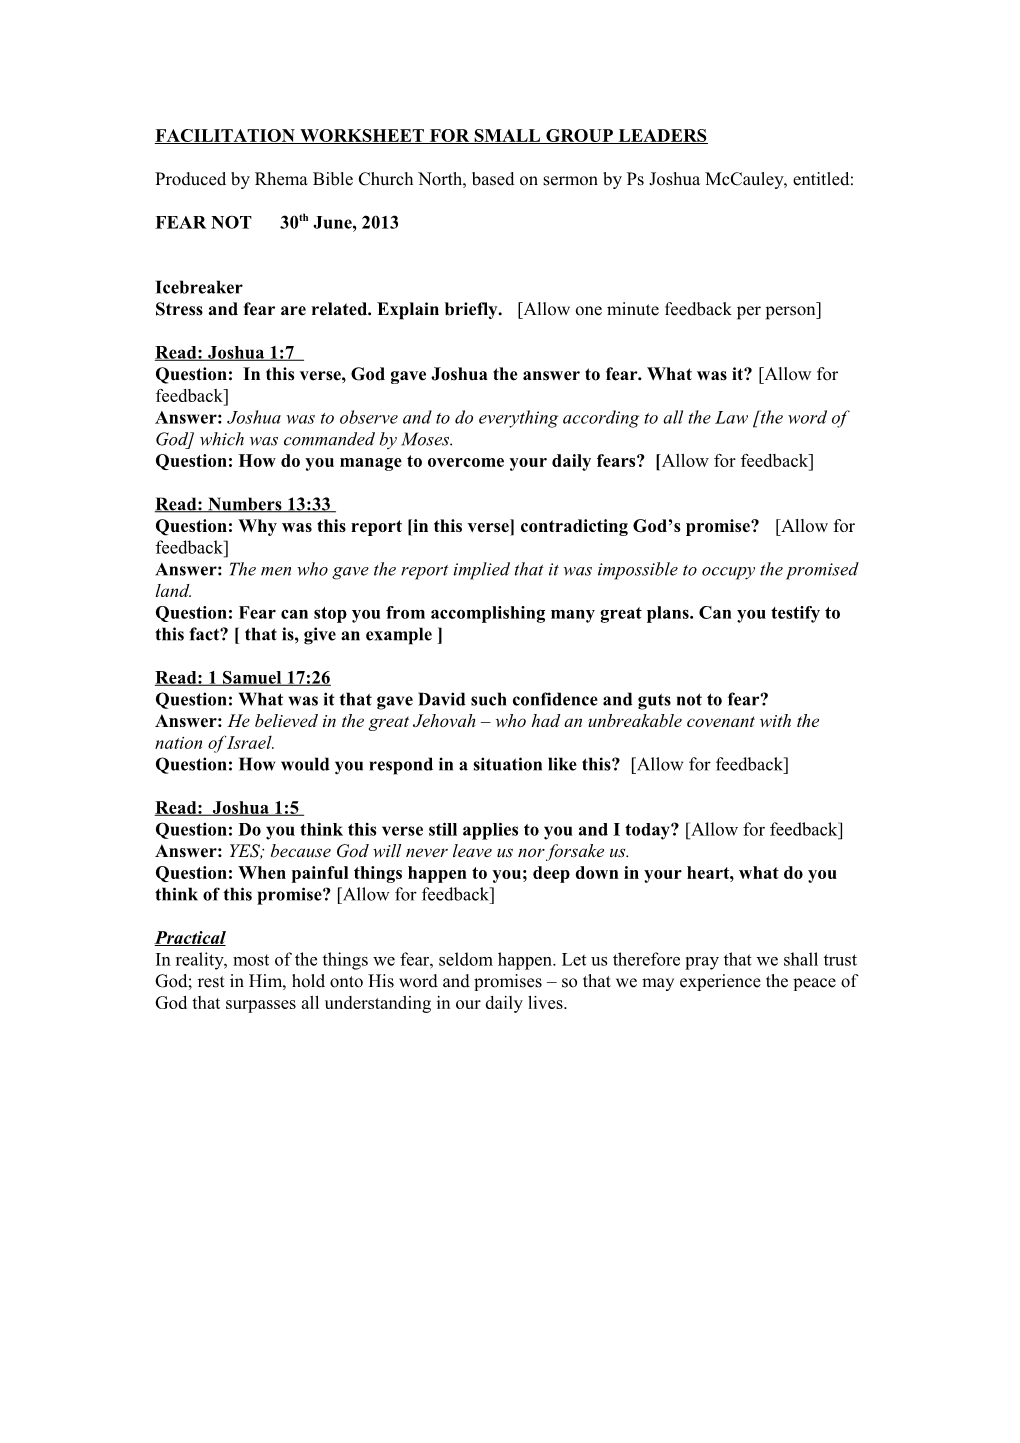 Facilitation Worksheet for Small Group Leaders